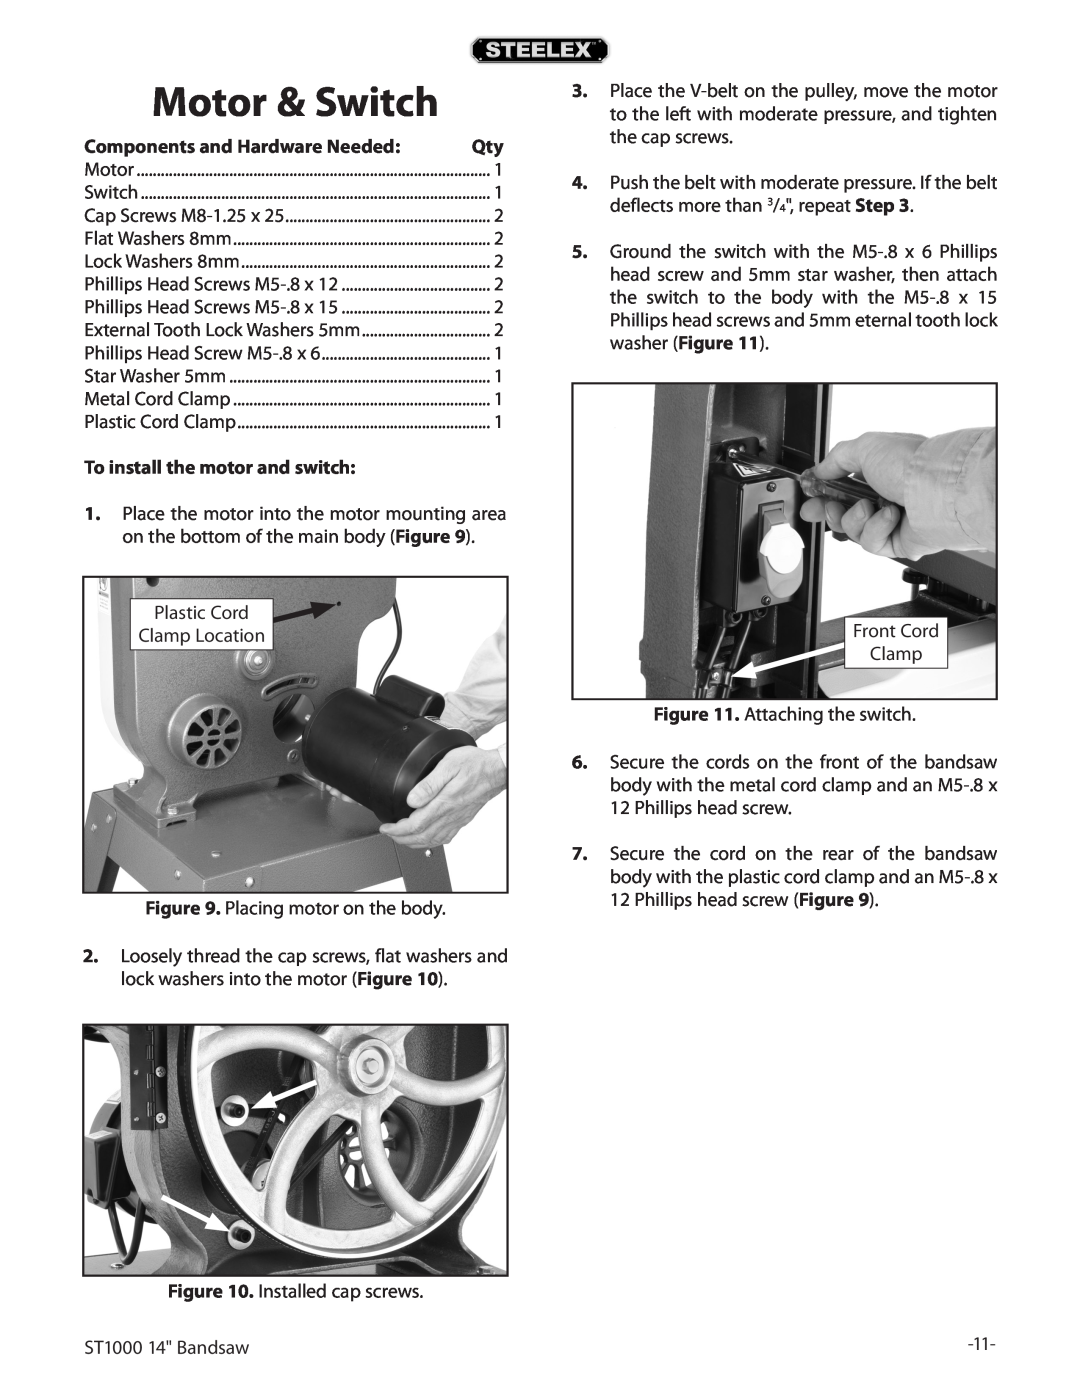 Woodstock ST1000 owner manual Motor & Switch, To install the motor and switch, Components and Hardware Needed 